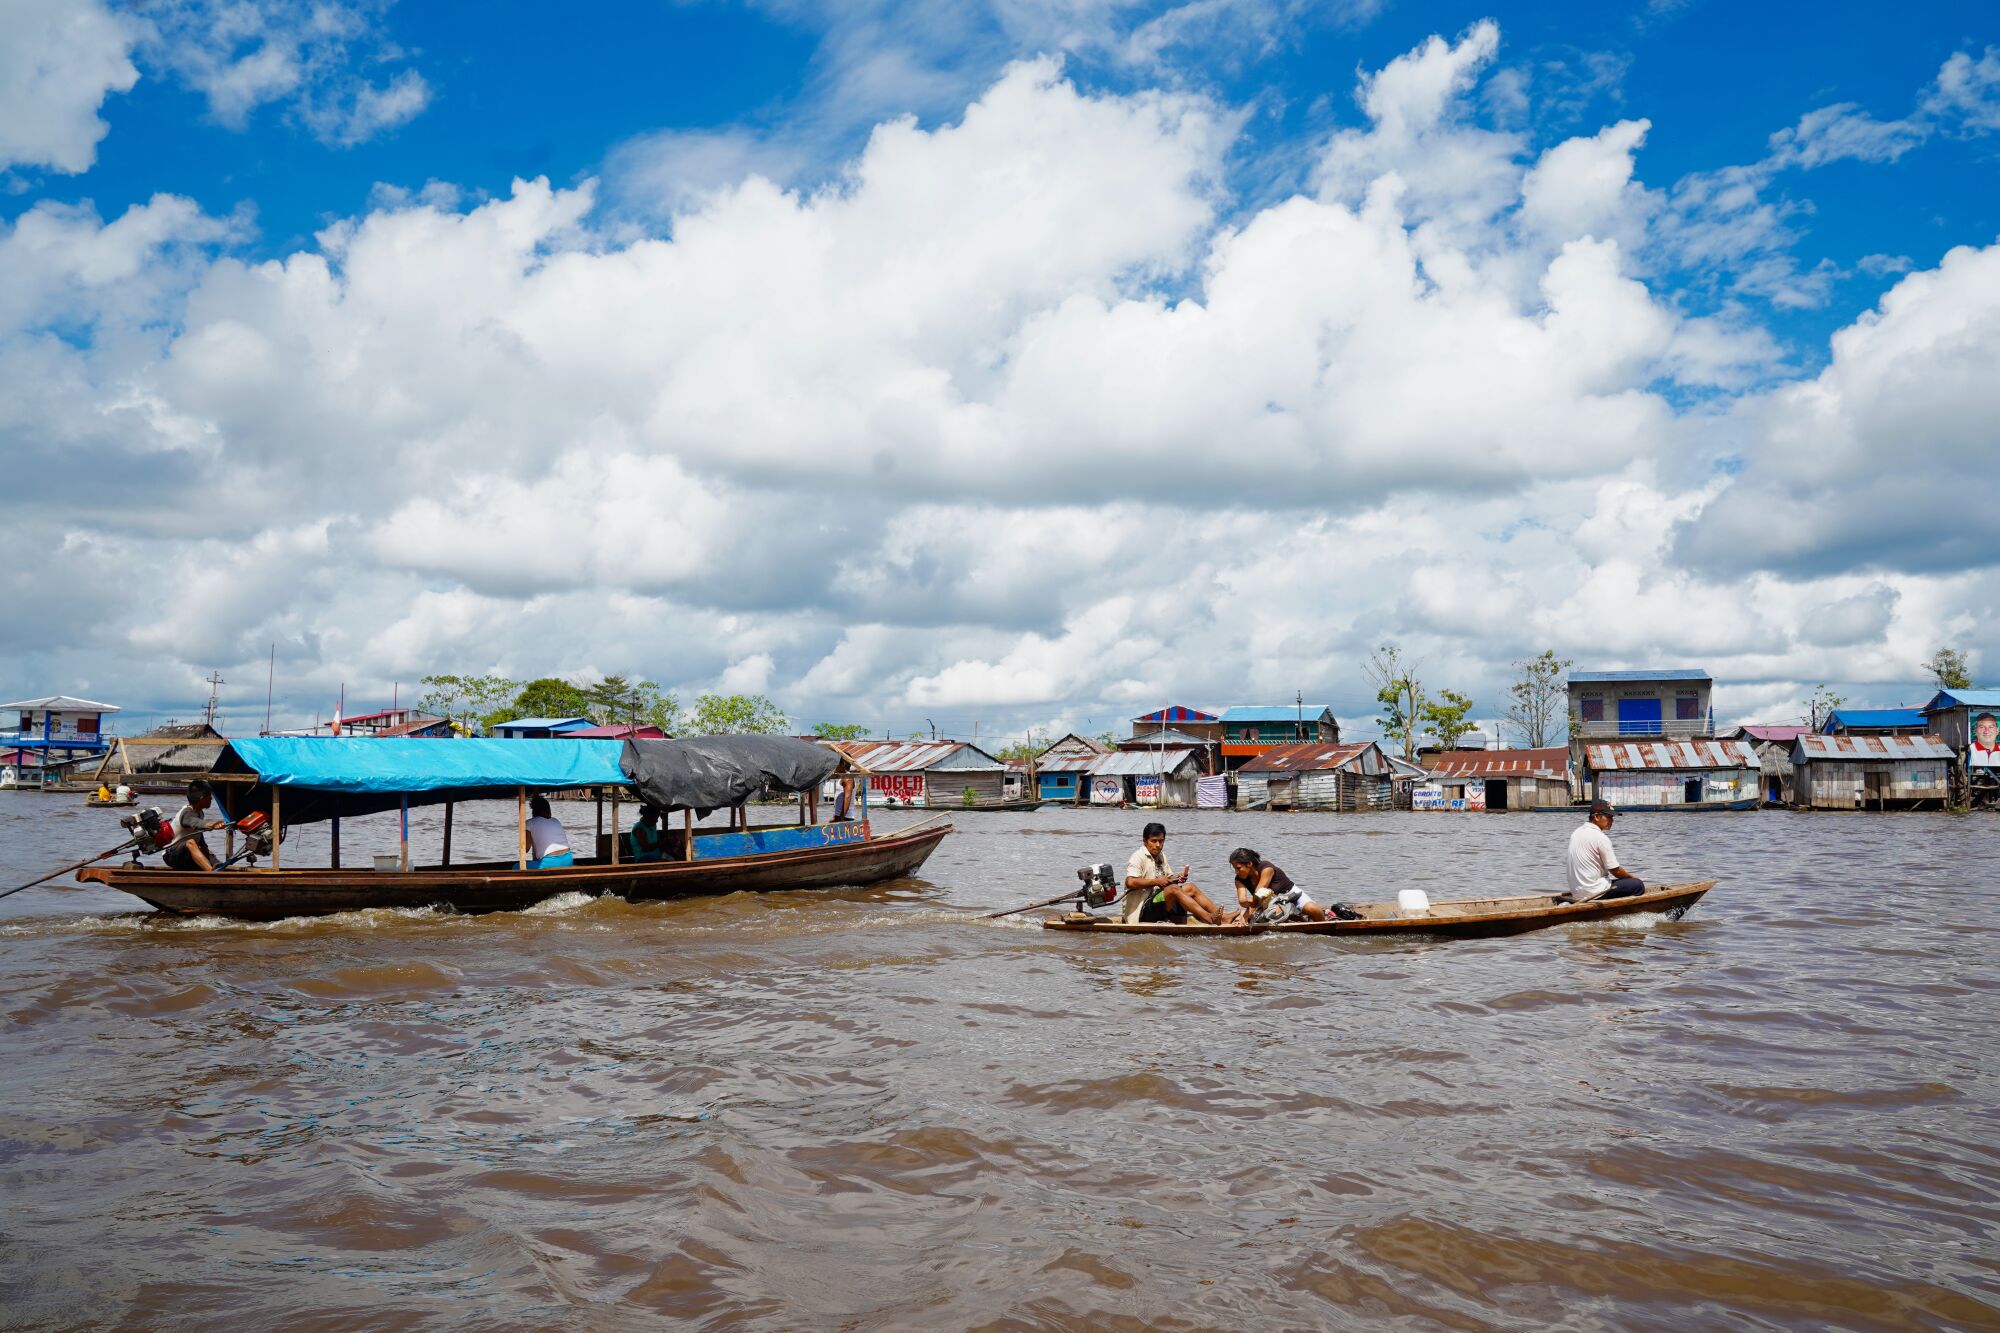 The Amazon River port of Belen in Iquitos, Peru, is reachable only by airplane or boat.